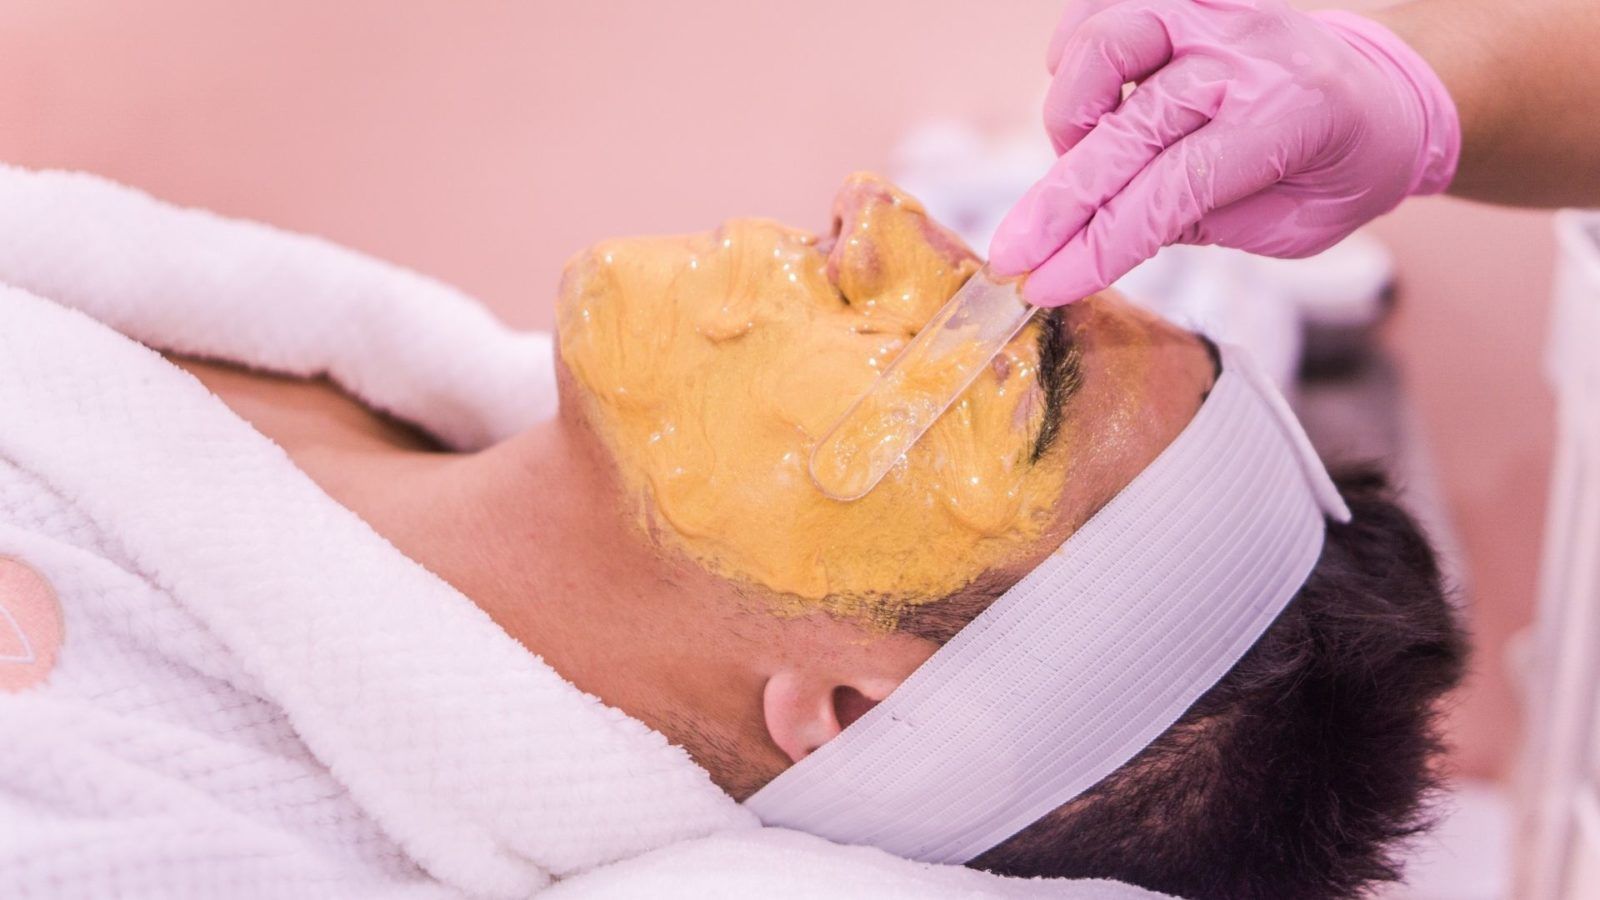 From bee stings to snail slime: The most bizarre facials in the world